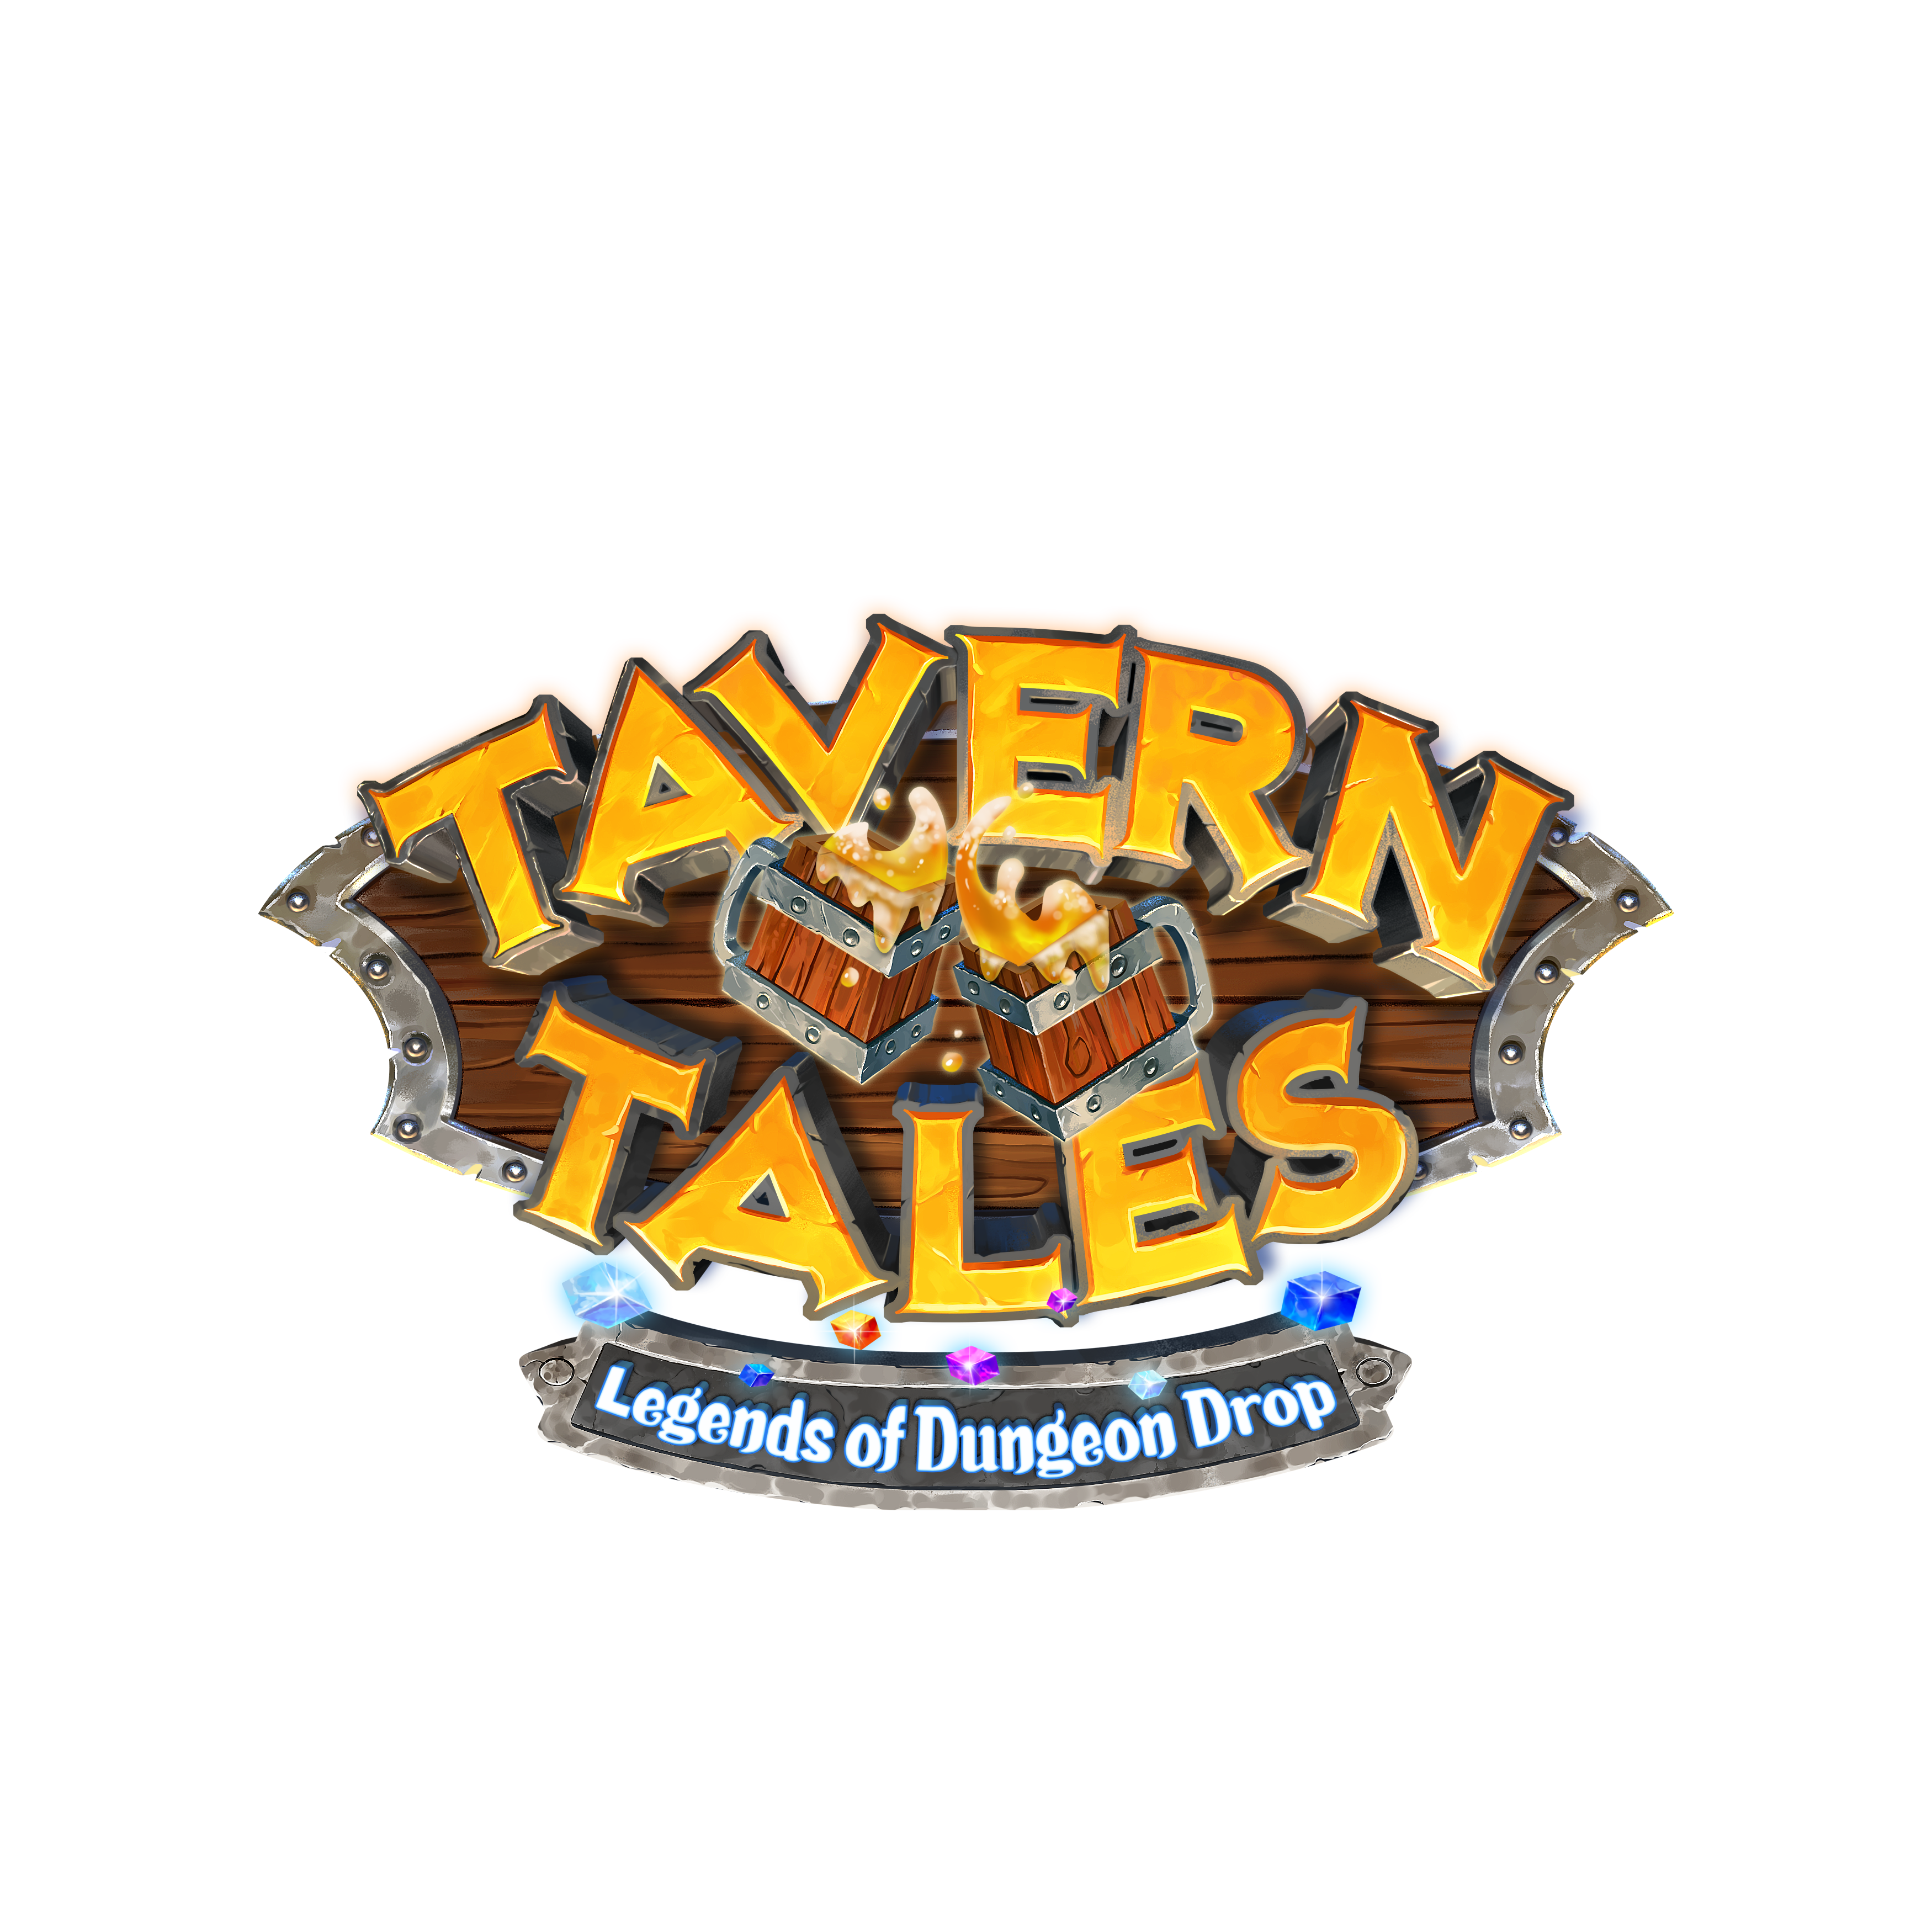 Tavern Tales: Legends of Dungeon Drop – Ice Demon Promo Card